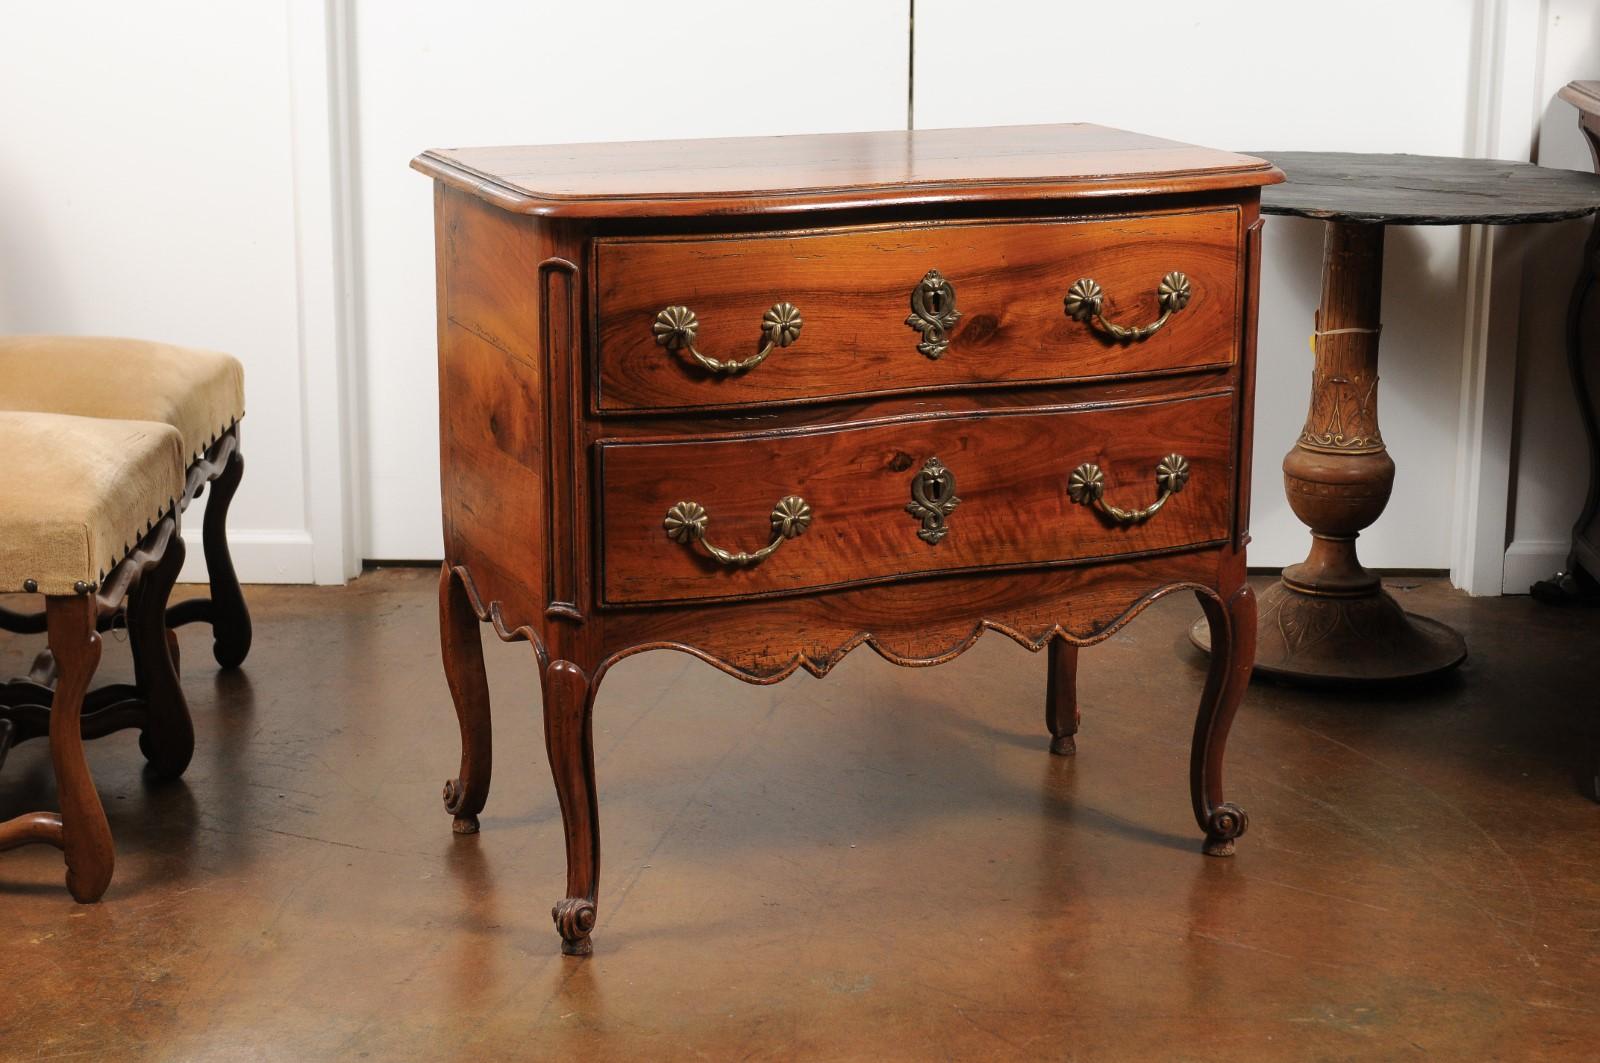 A French Louis XV style walnut two-drawer commode from the early 20th century, with scalloped skirt, cabriole legs and brass hardware. Born in France at the turn of the century during the Belle Époque era, this pretty commode features a rectangular